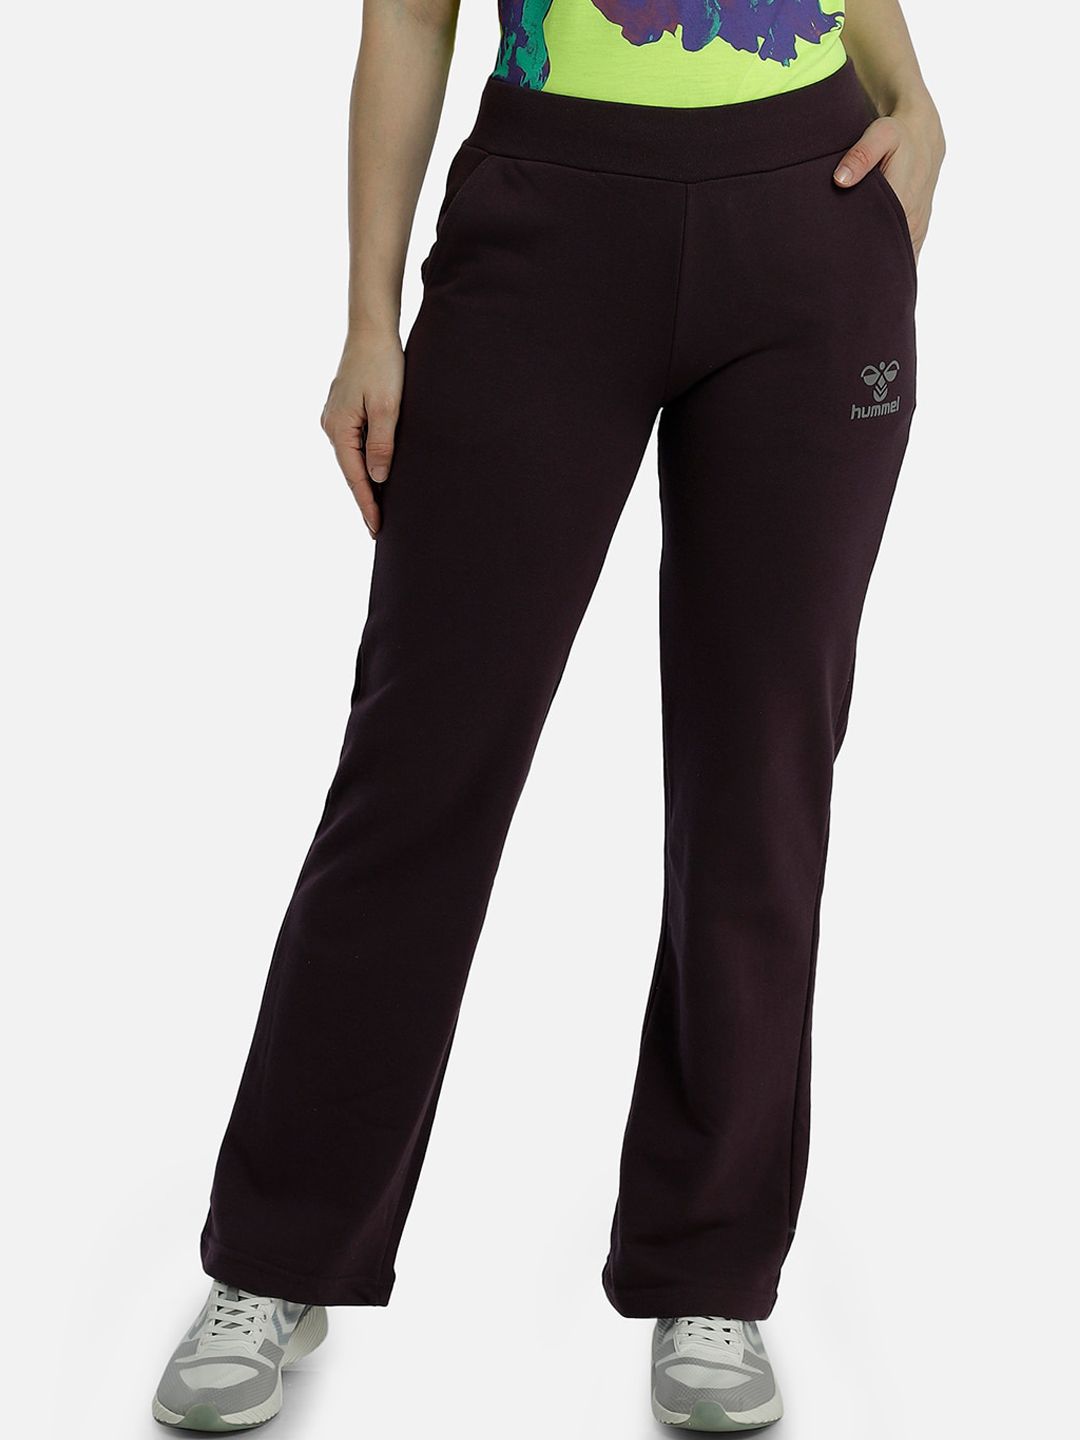 hummel Women Purple Solid Track Pants Price in India